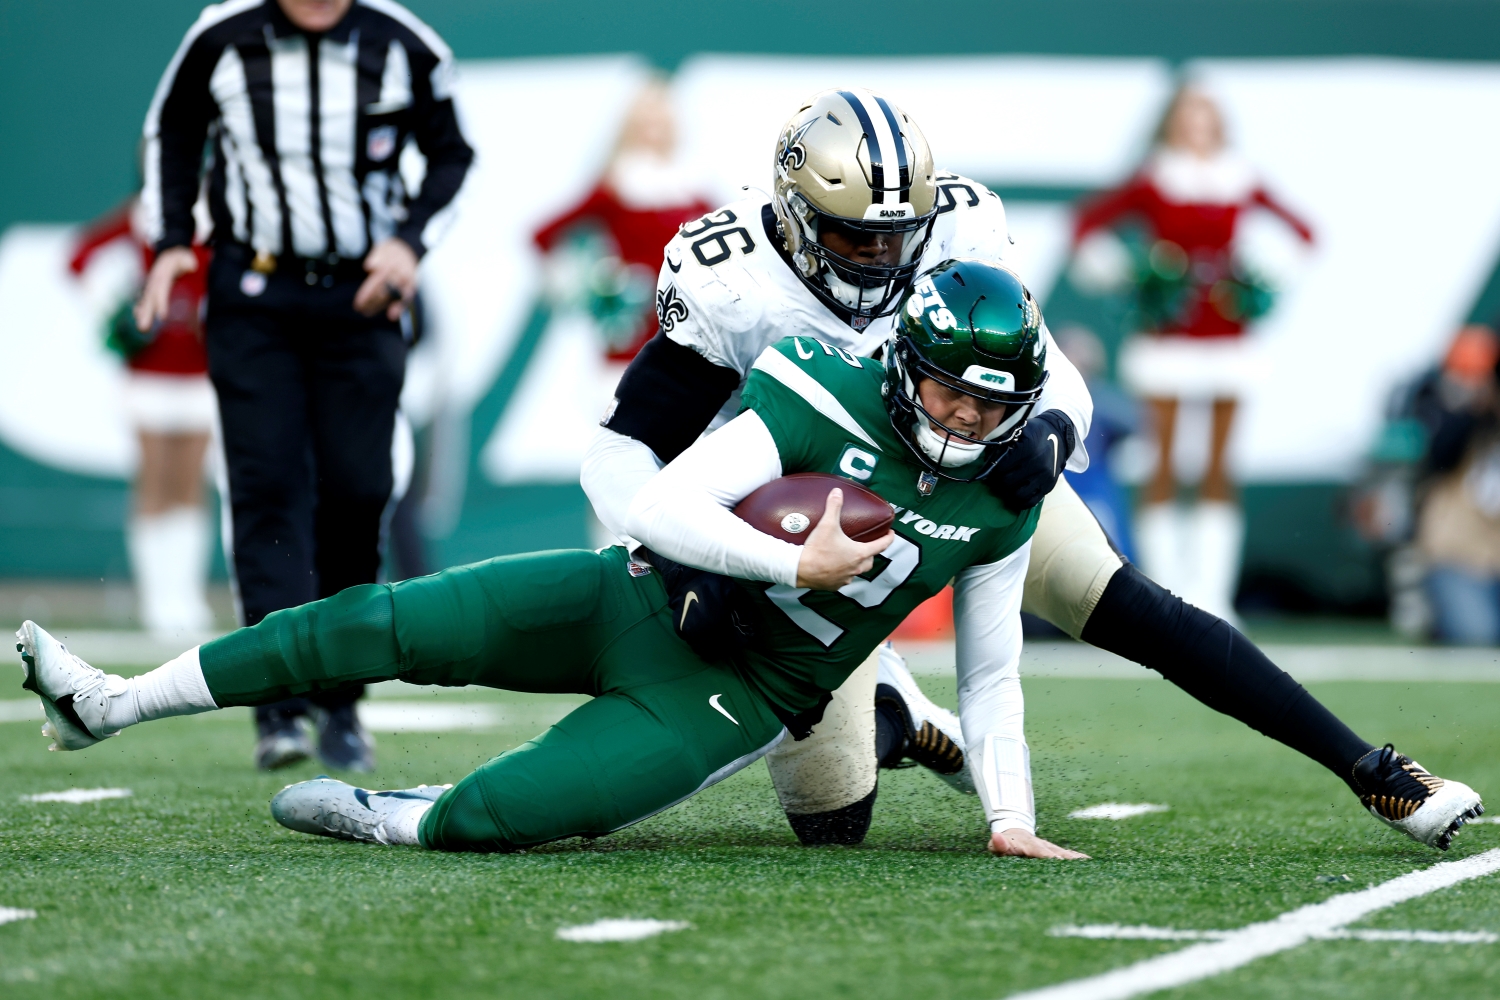 Jets QB Zach Wilson gets sacked by a New Orleans Saints defender.